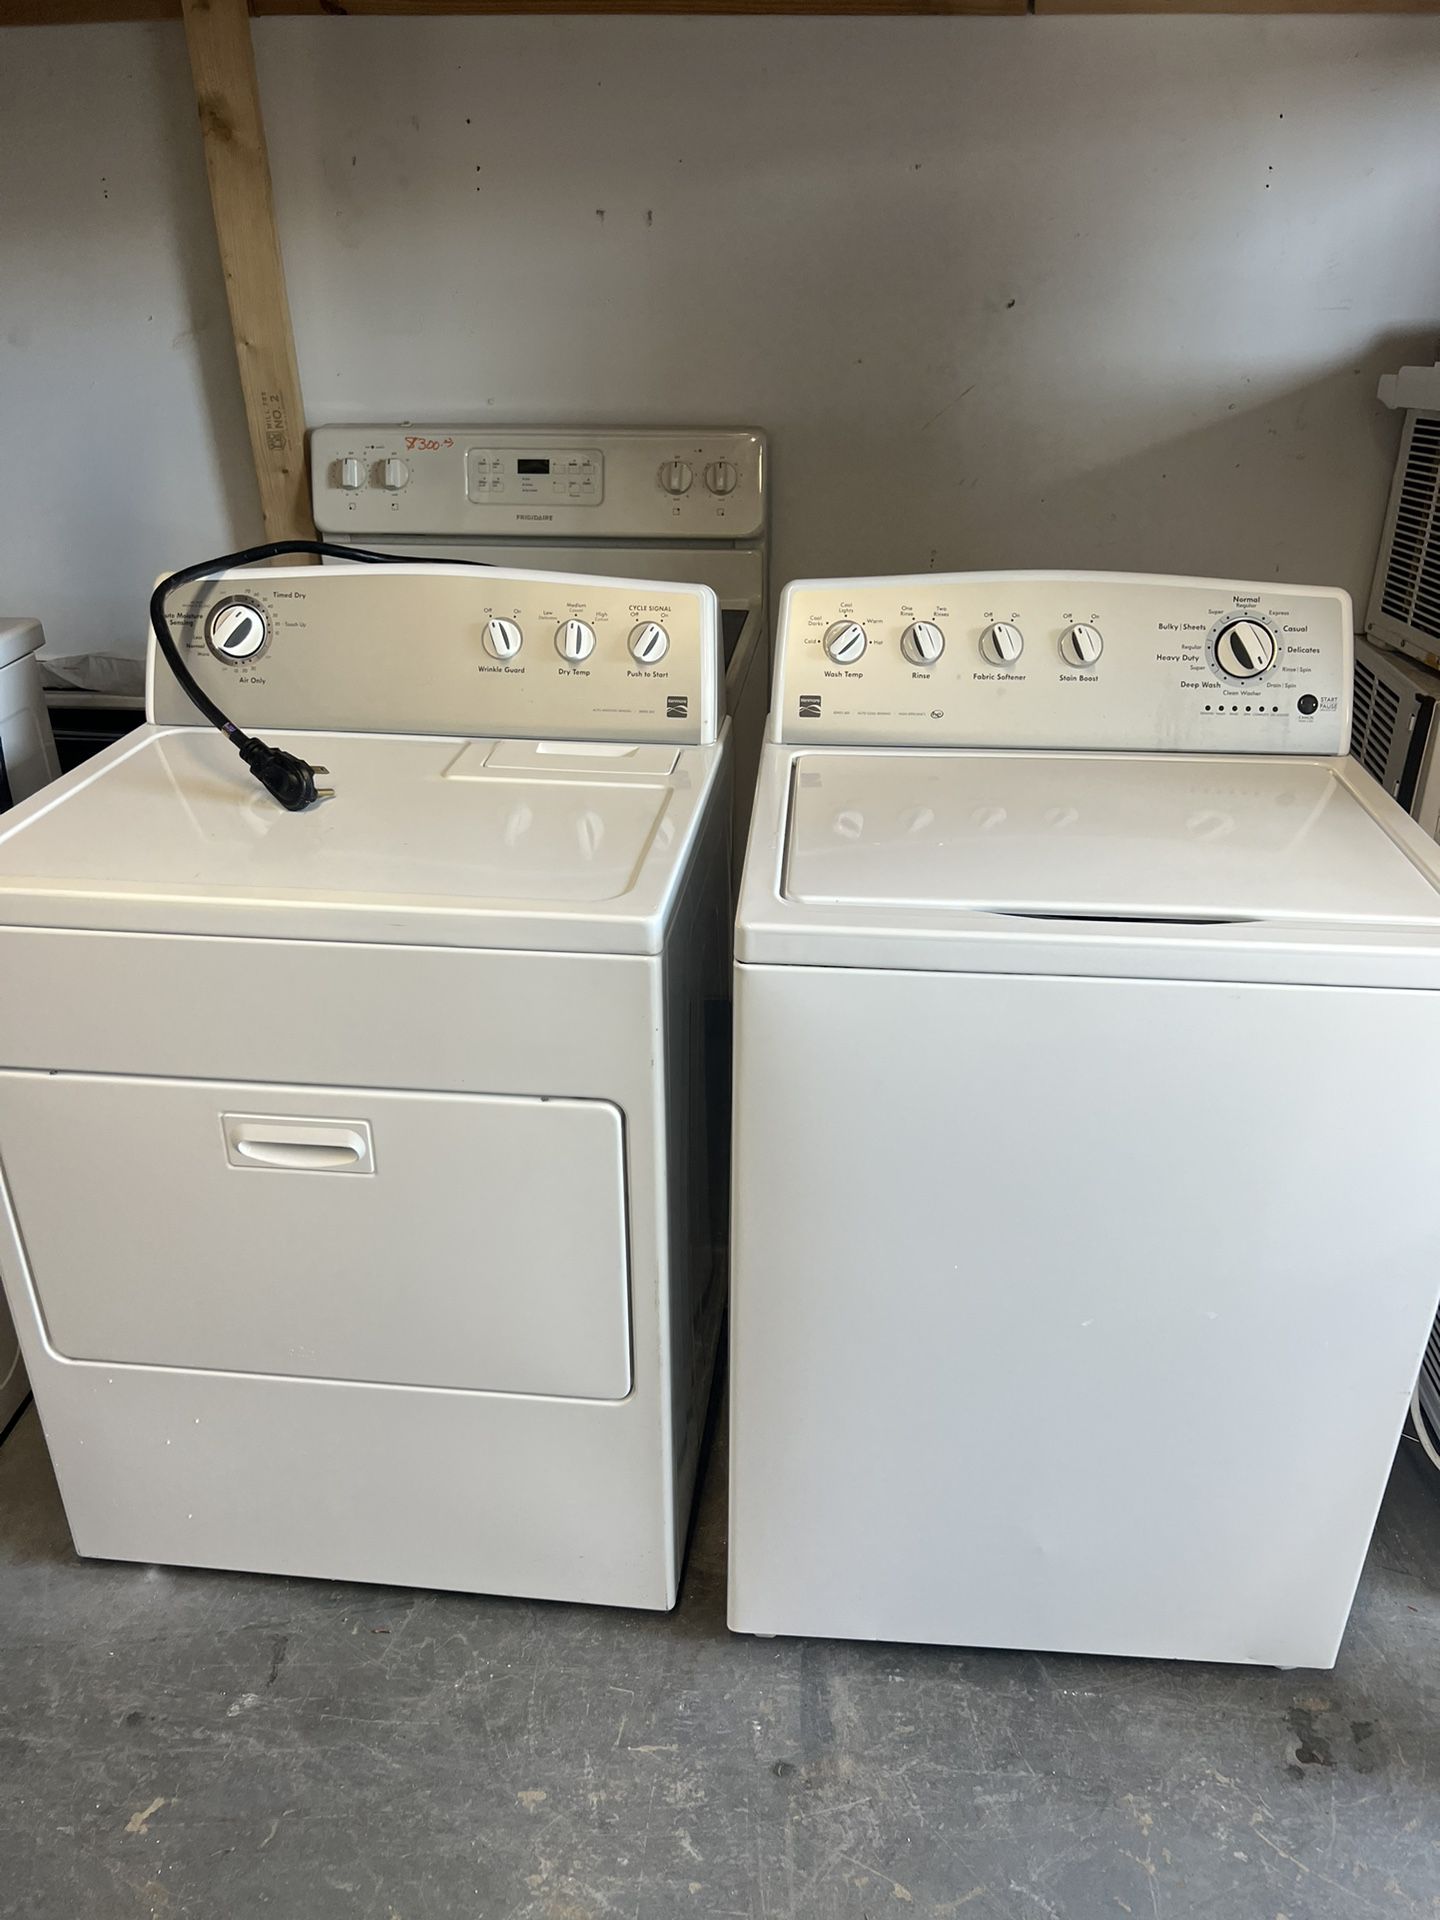 Kenmore washer and dryer great condition working perfect ready tasted With warranty delivery and installation Available 